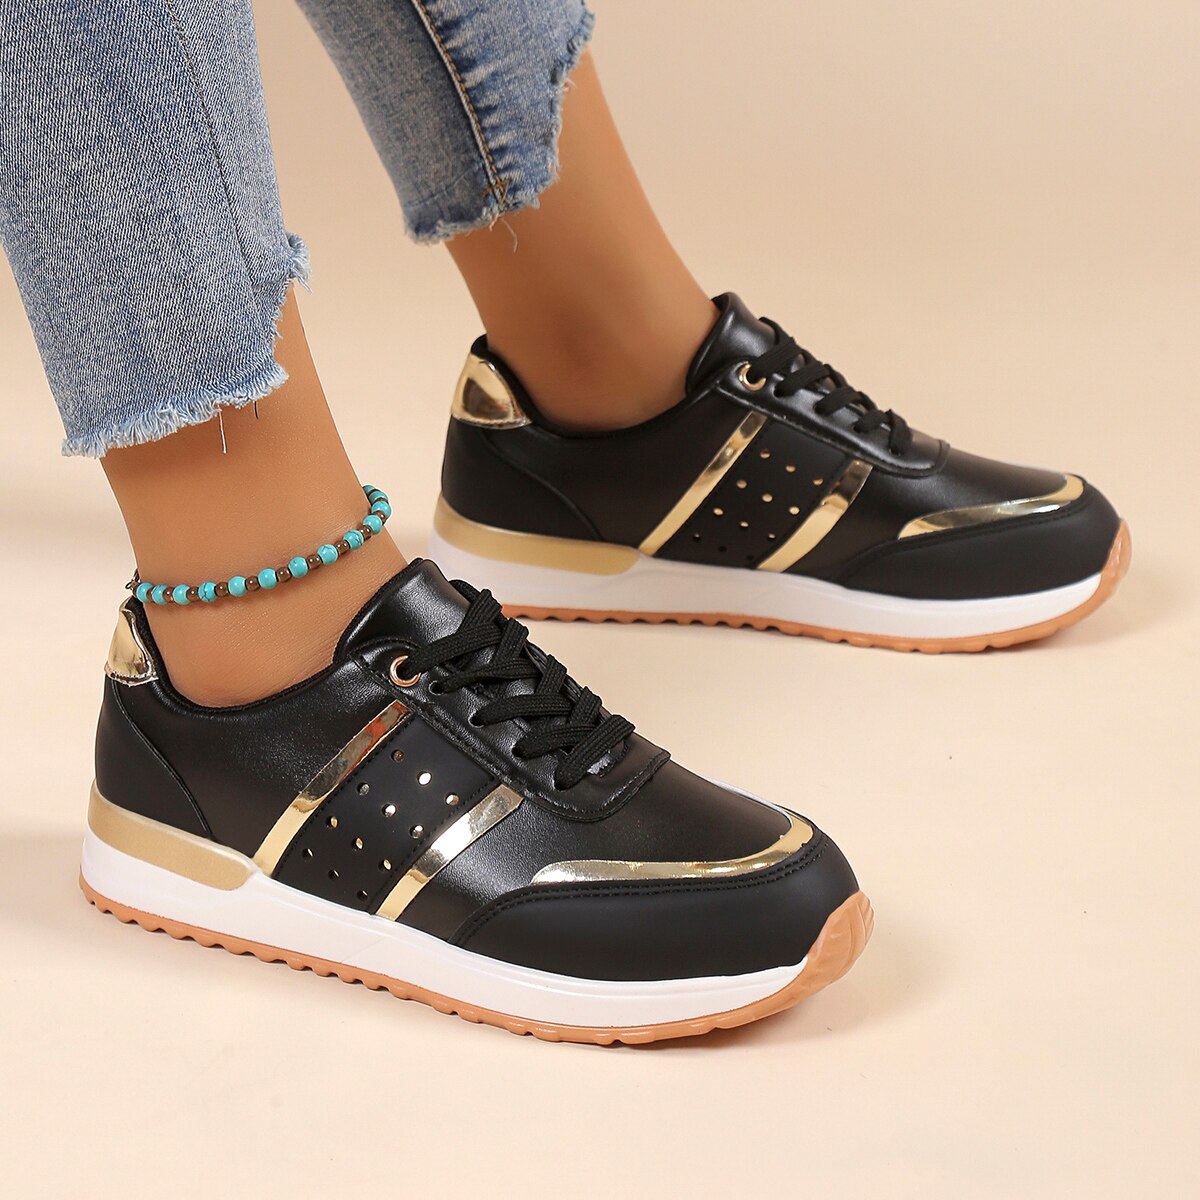 Women Leather Stylish Breathable Comfy Winter Orthopedic Platform Insulated Sneakers Shoes - Smiths Picks - Winter Boots & Accessories